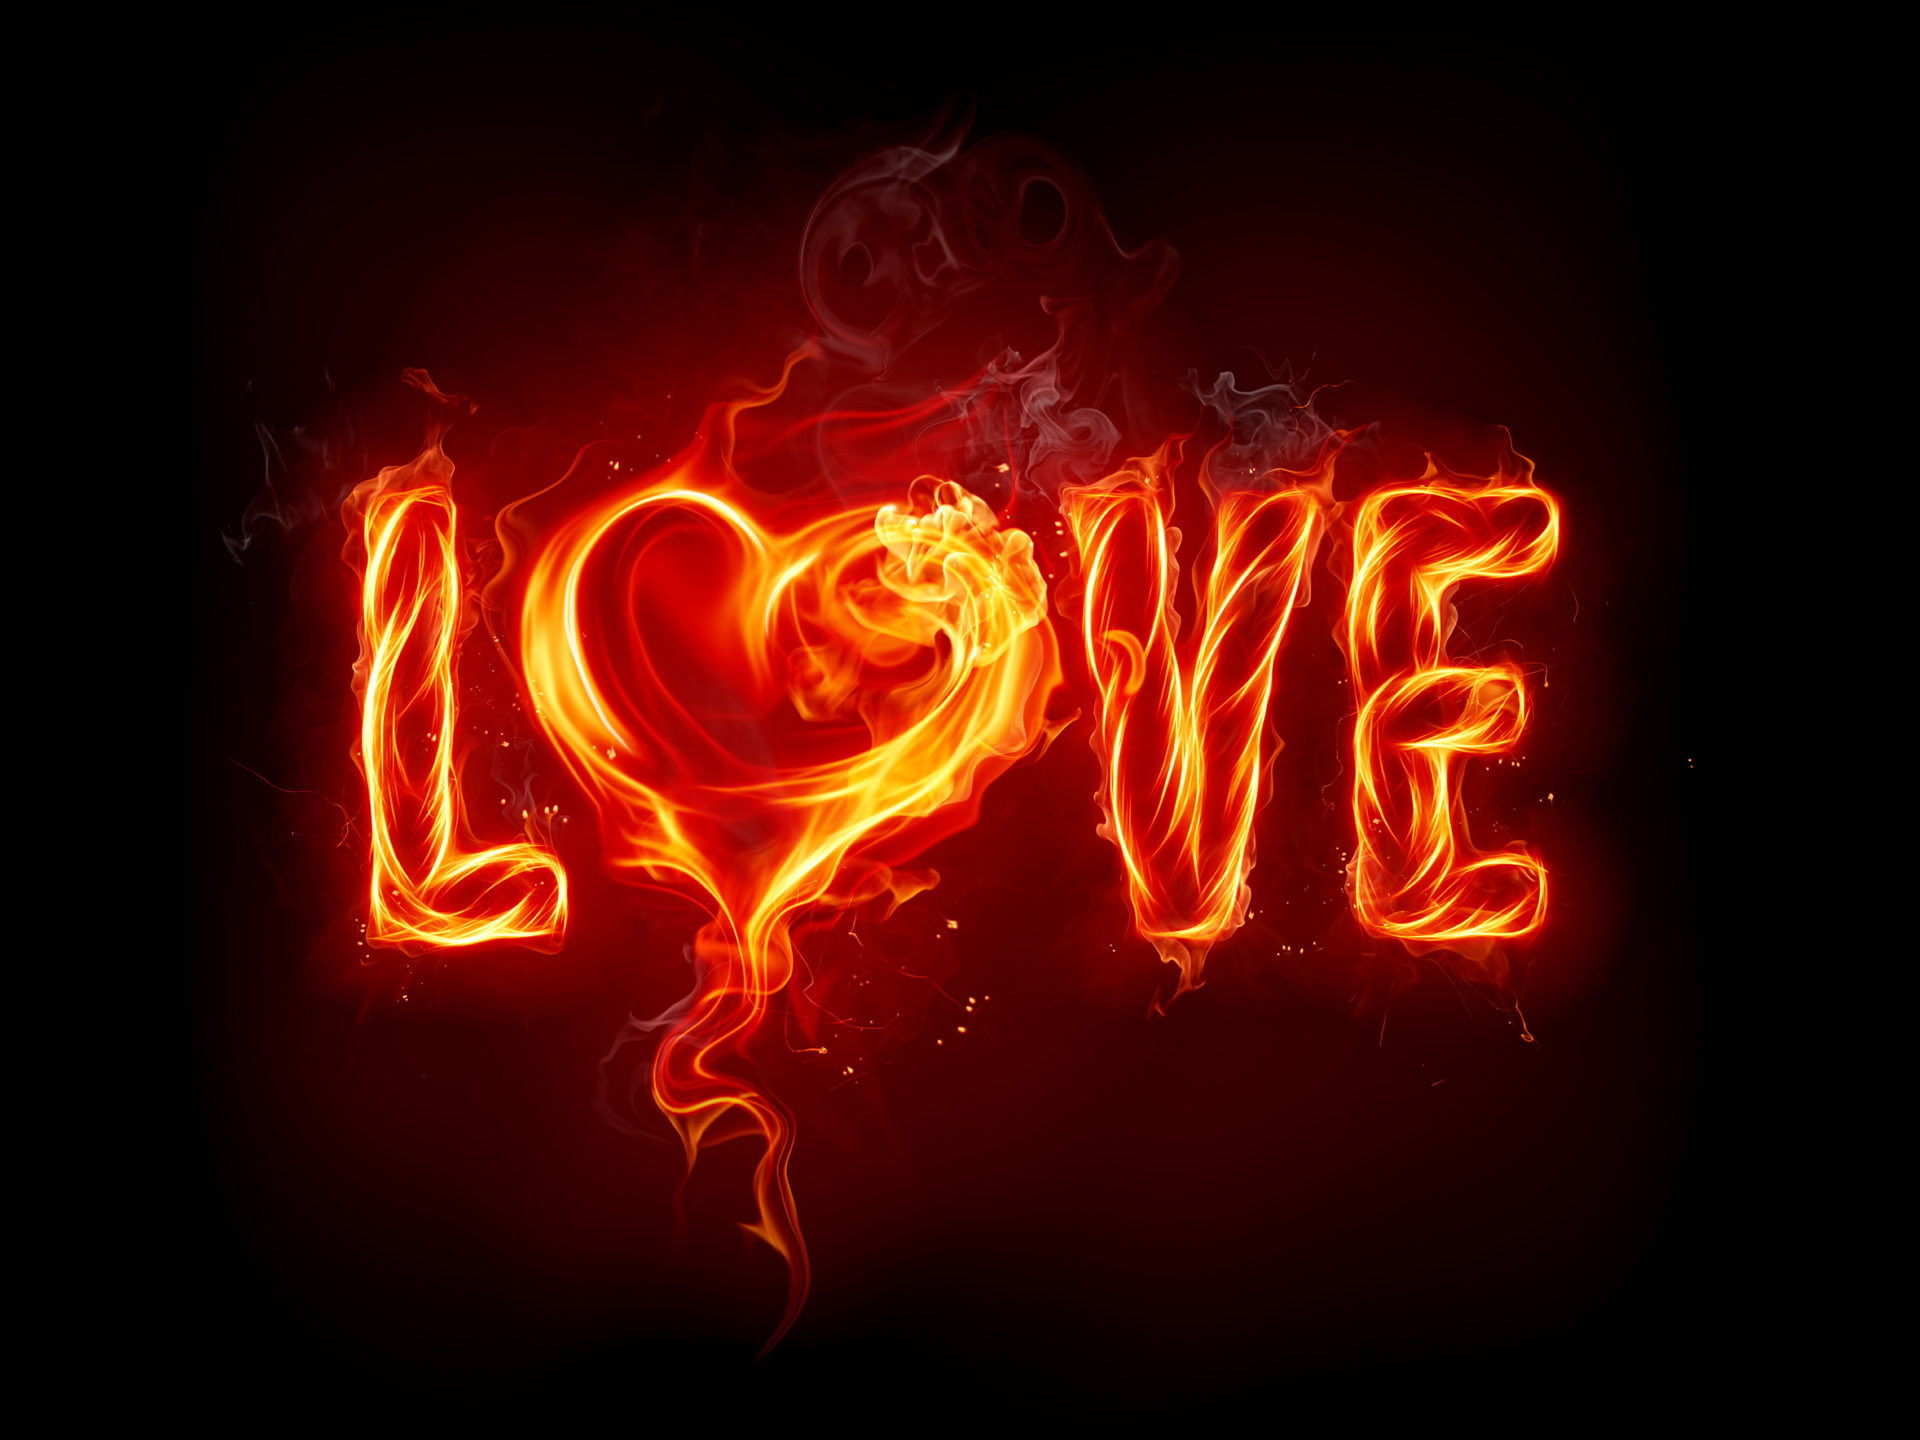 Love drawn with fire